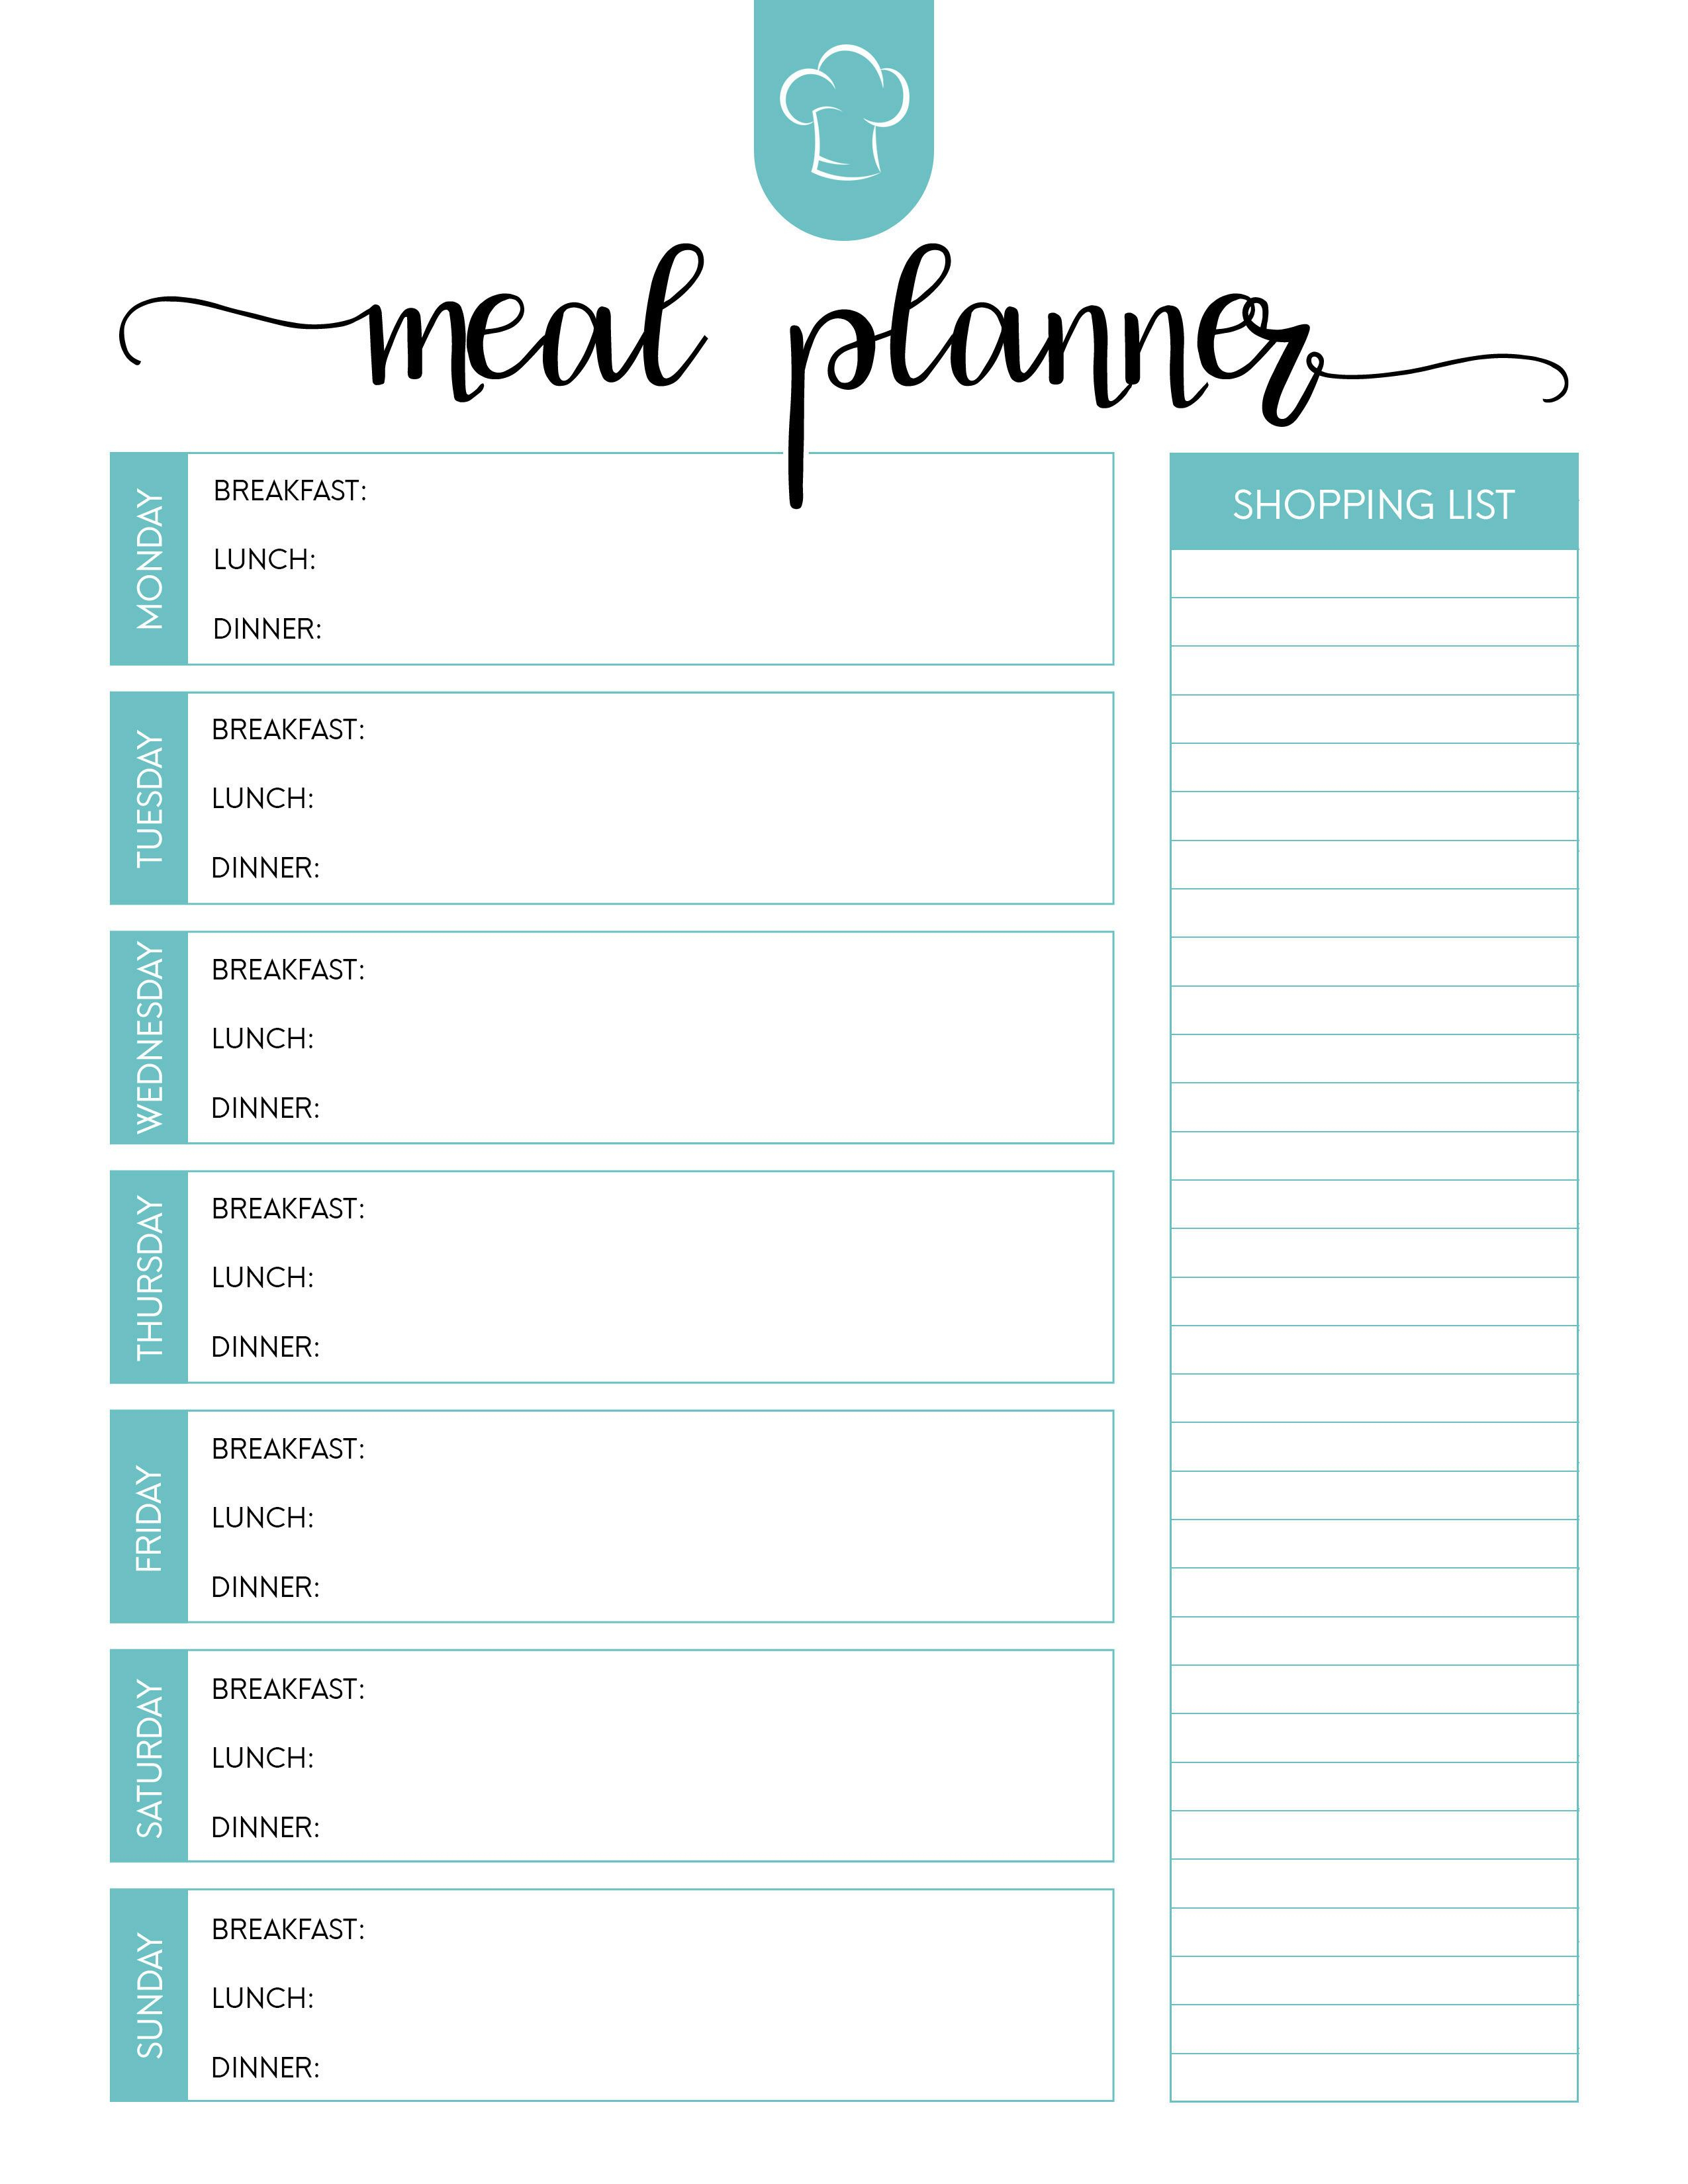 Simple Meal Planner Template | Meal Planner Template | Meal Planner - Free Printable Weekly Meal Planner